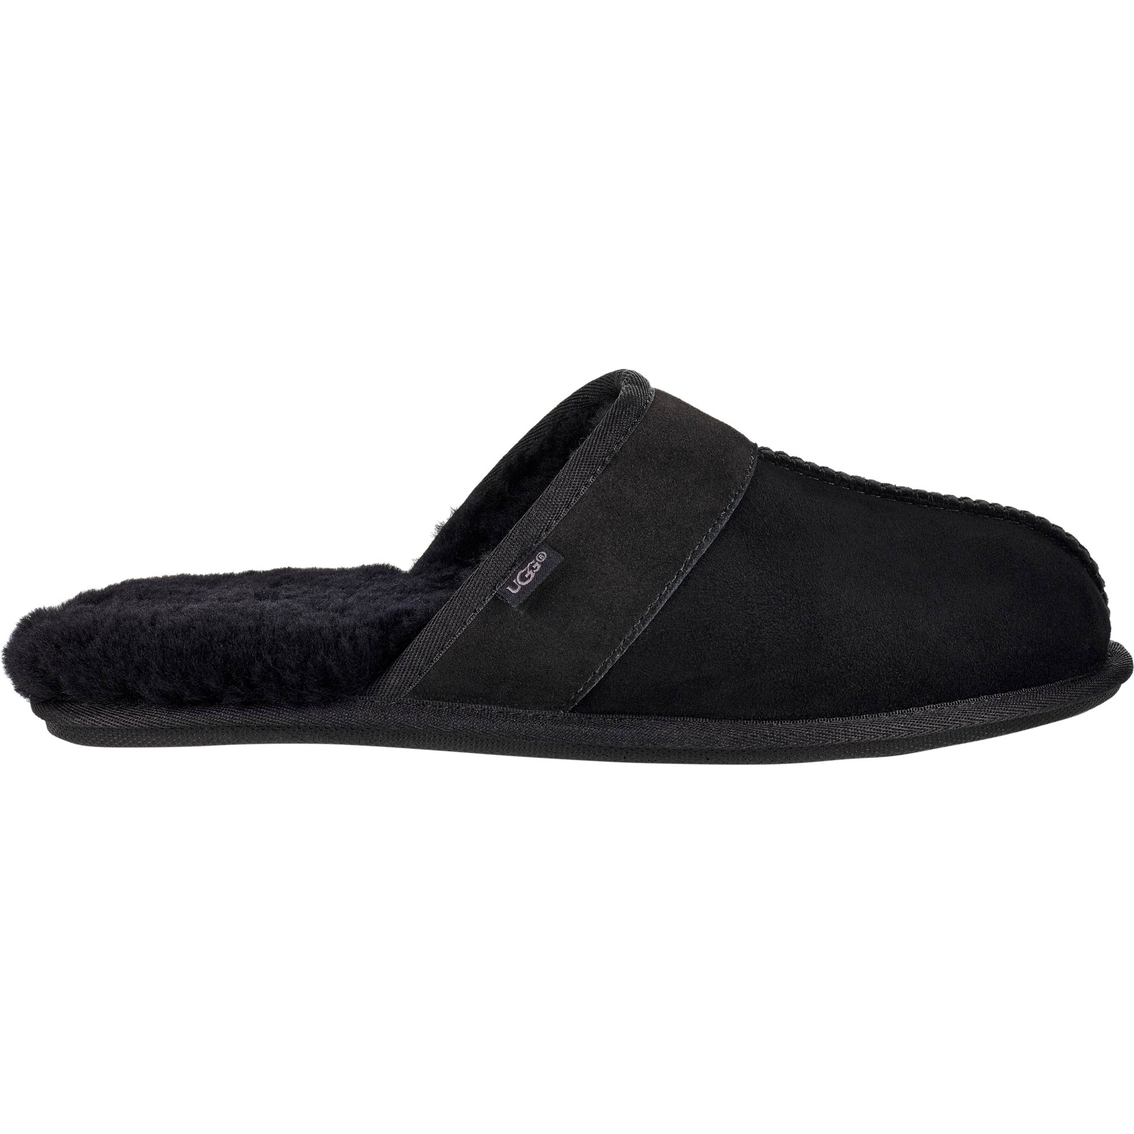 Ugg Leisure Slides | Slippers | Shoes 